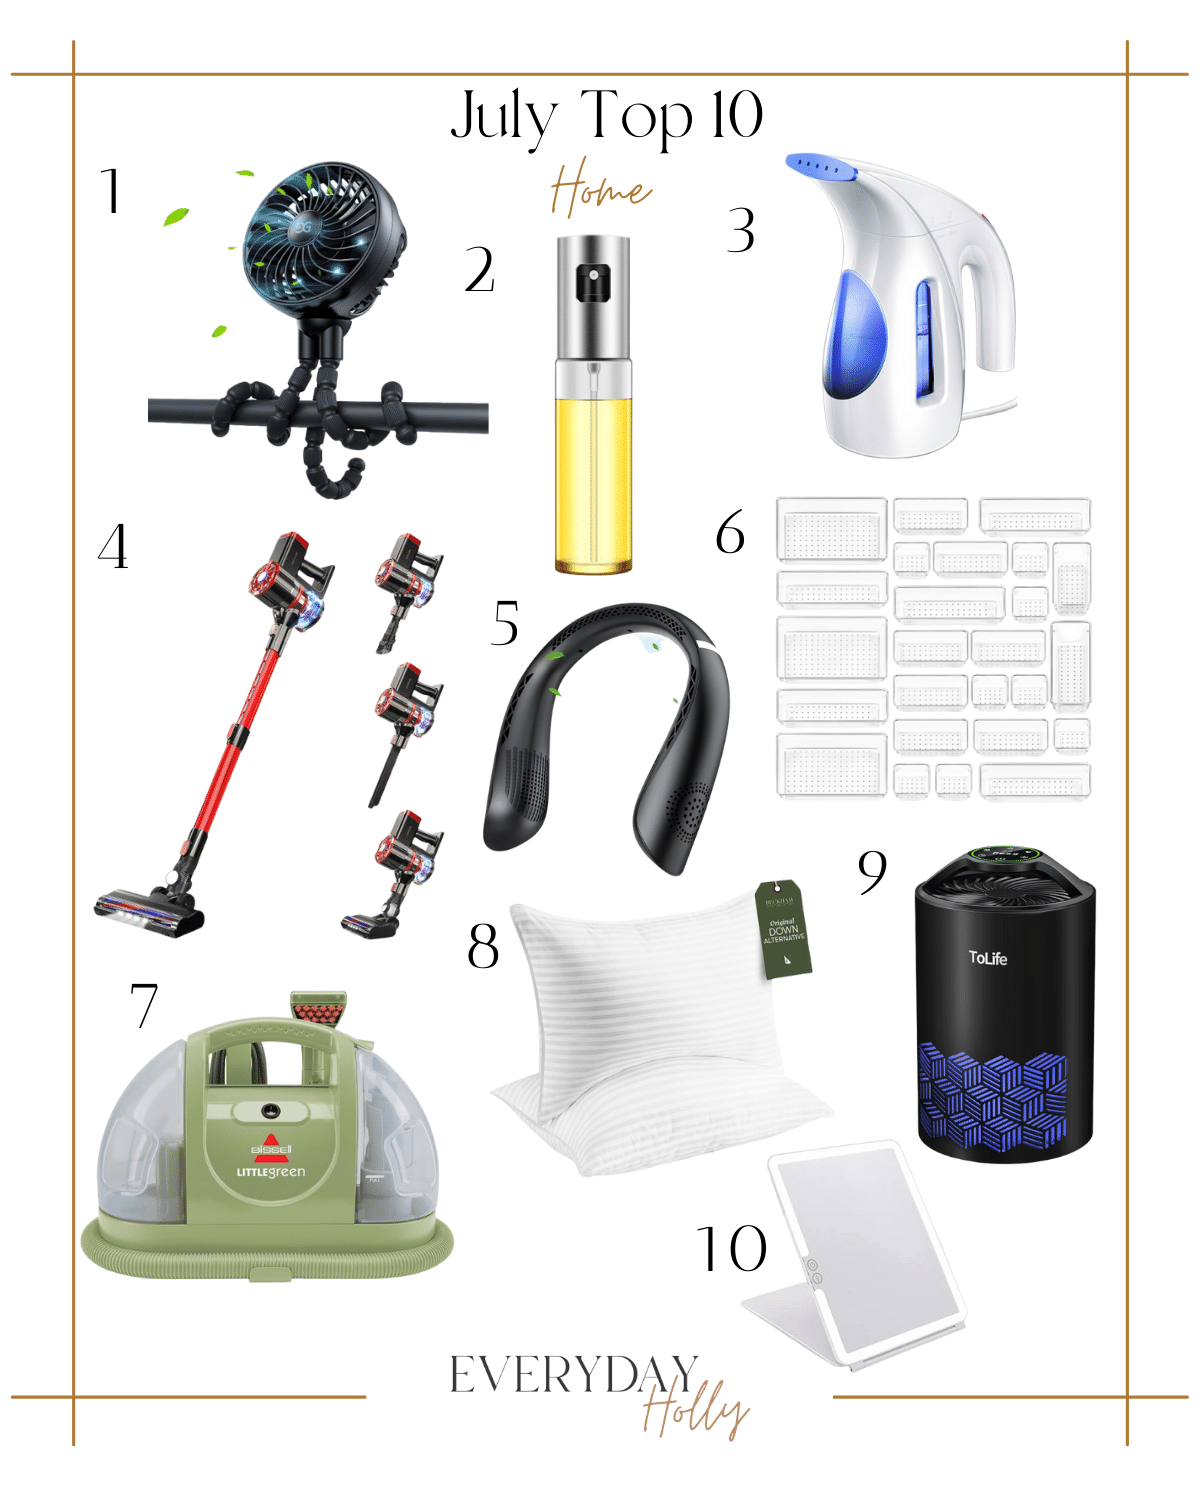 July Top 10 Home | #decor #home #clean #organize #vacuum #cooking #travel #vacation